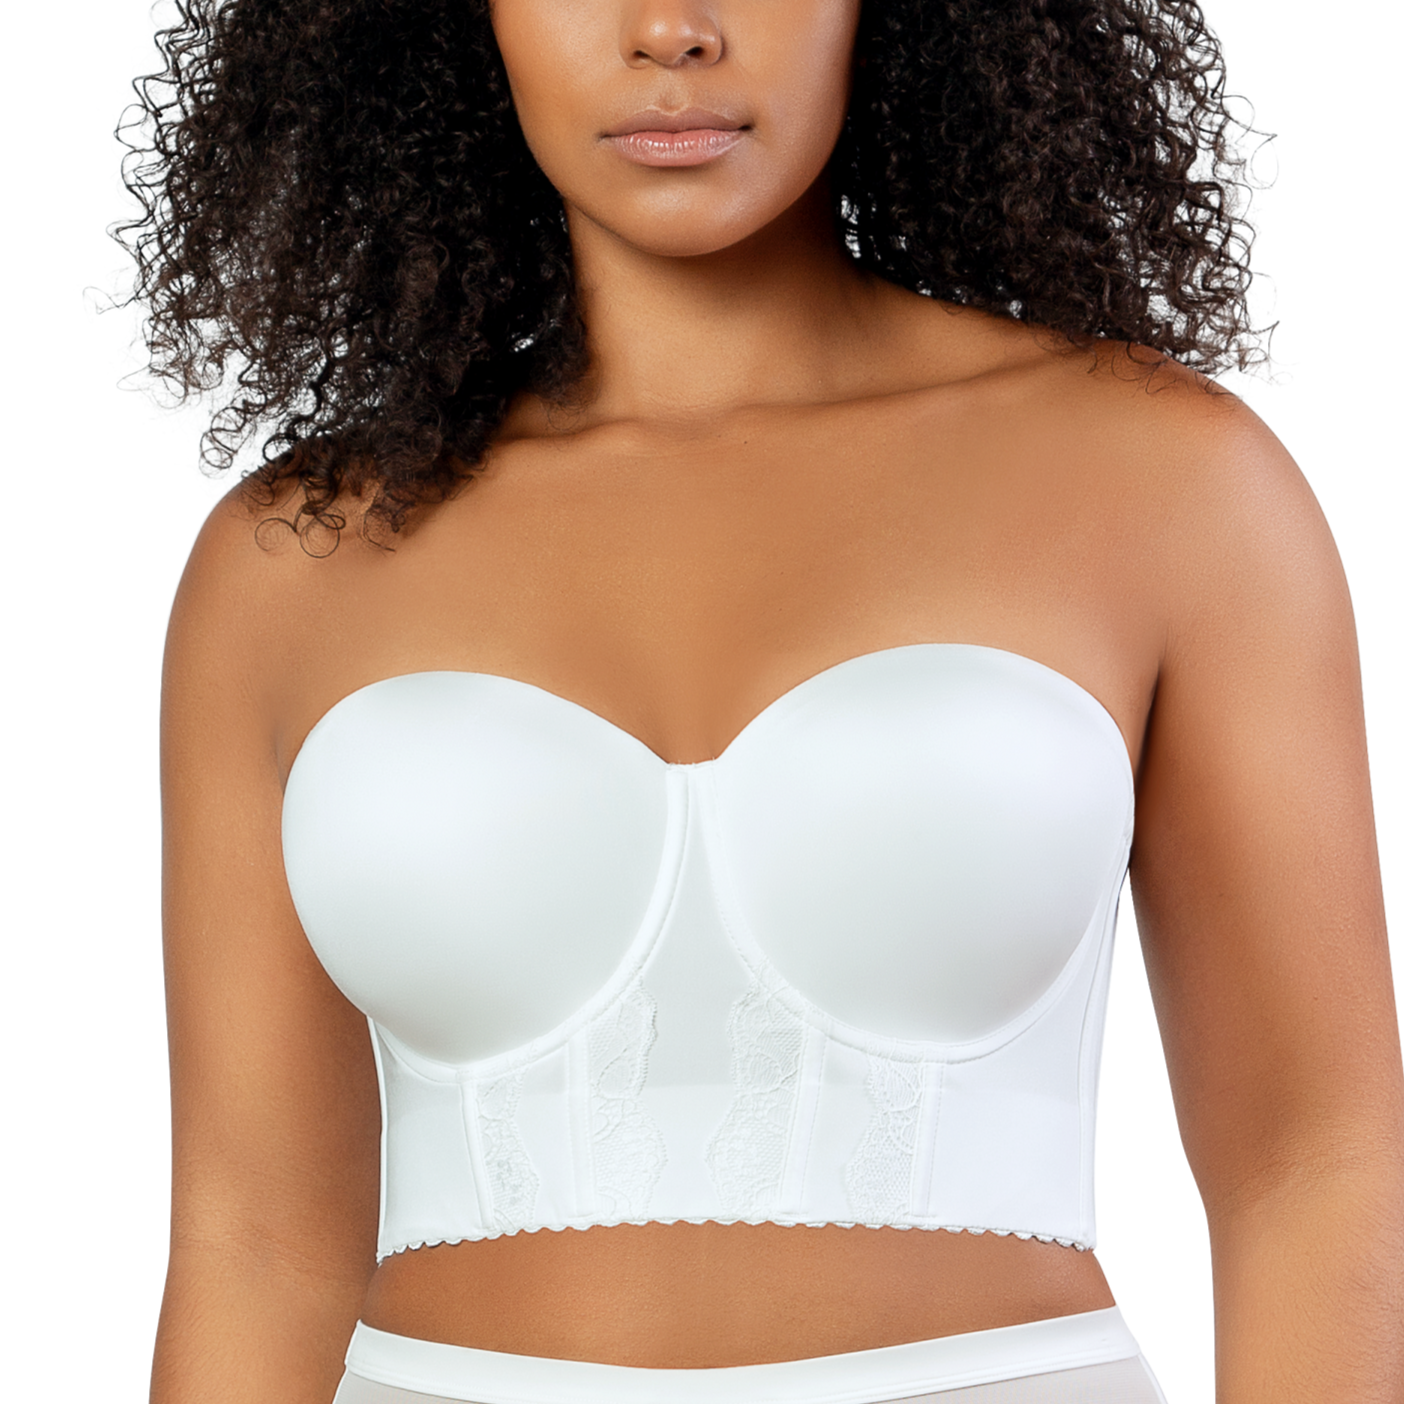 An absolute essential for the IBTC !! @Pepper🌶️ Bras #petitefashion #